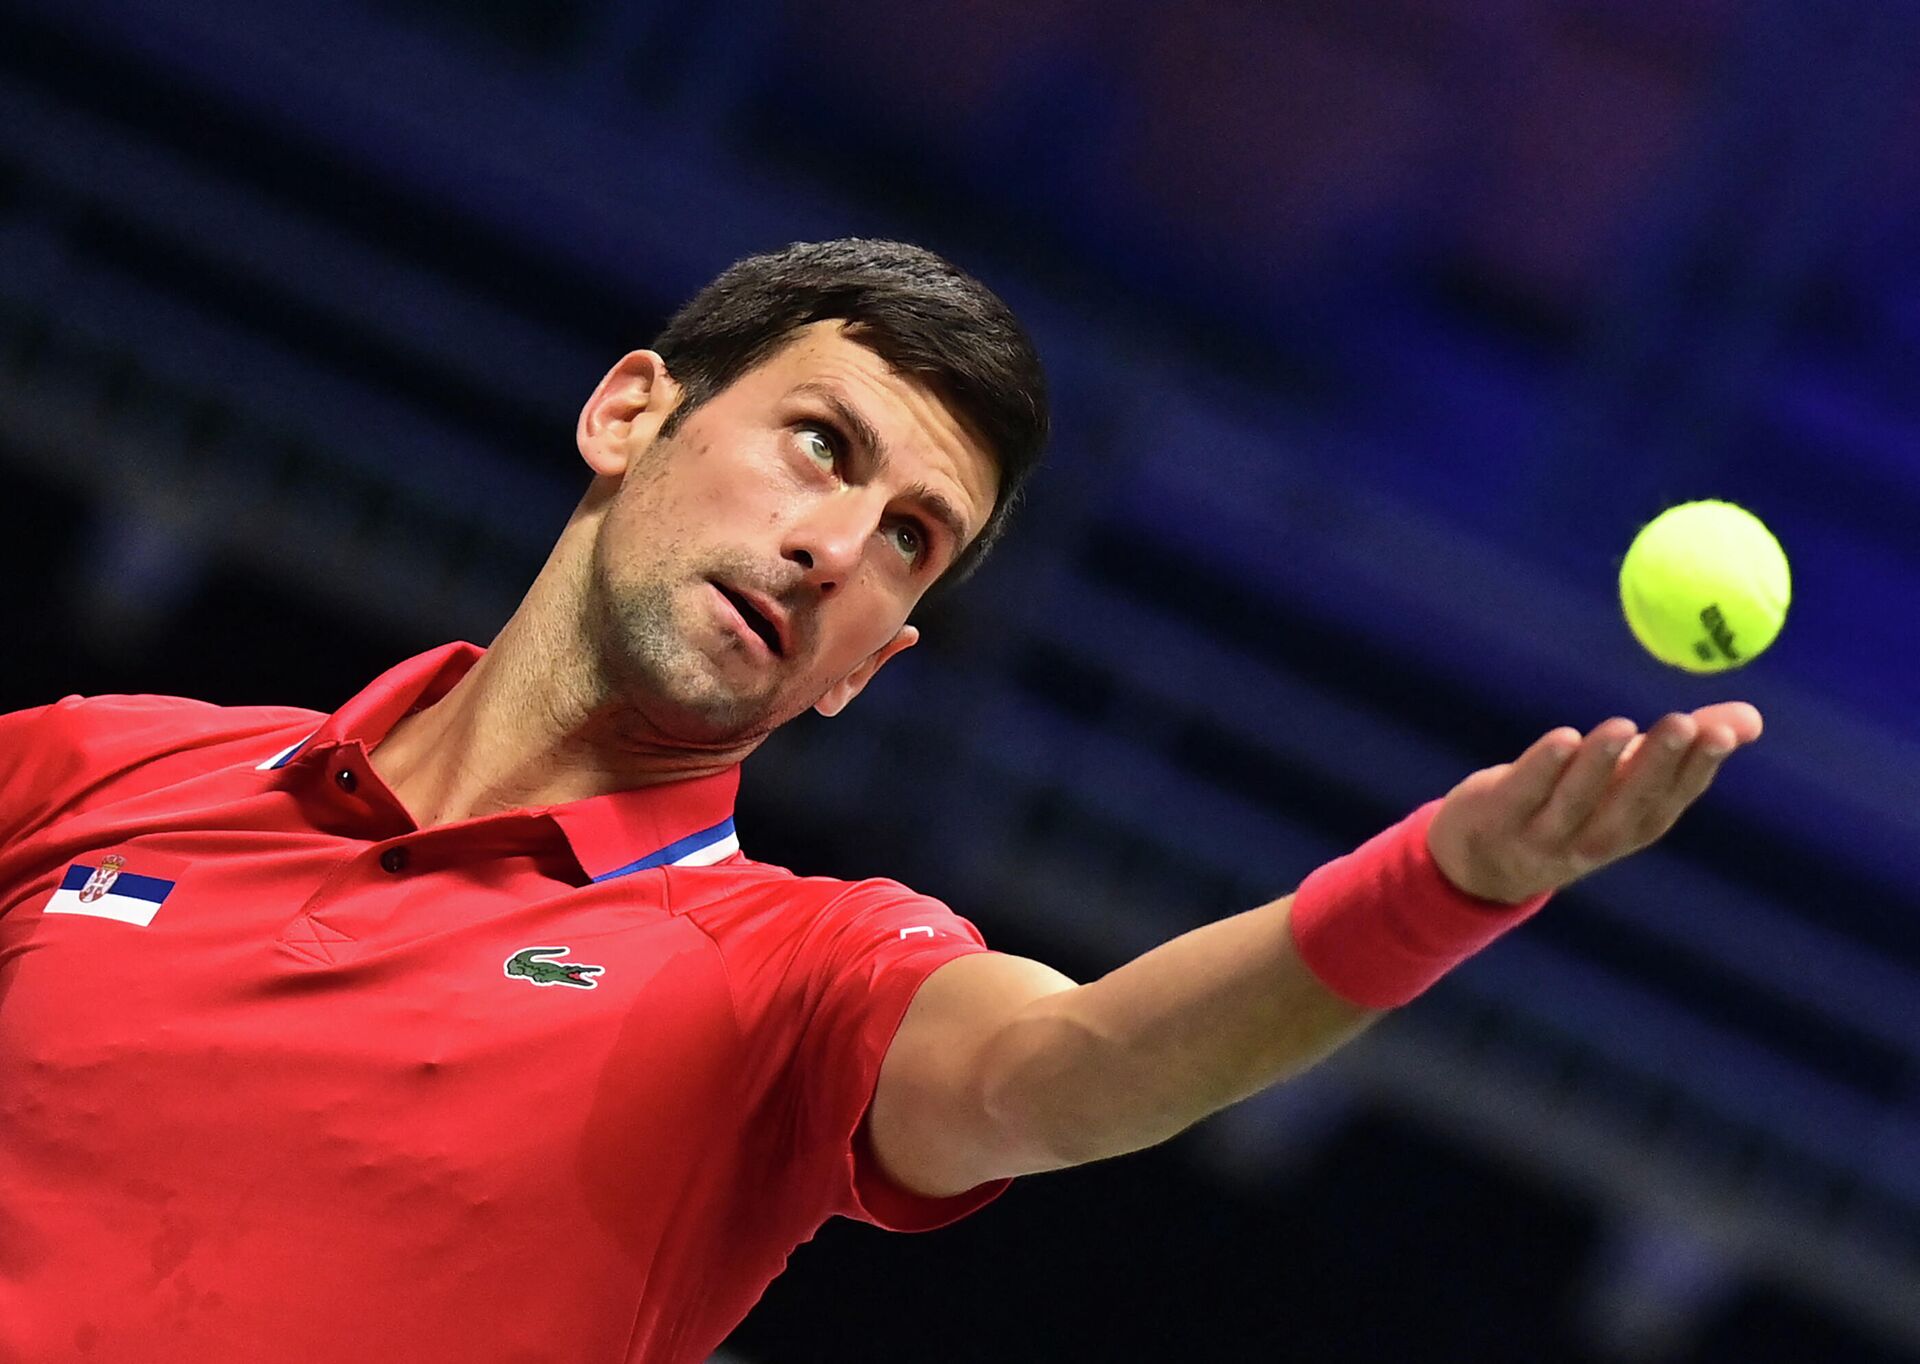 Serbia's Novak Djokovic serves the ball to Germany's Jan-Lennard Struff (not pictured) during the men's singles group stage match between Serbia and Germany of the Davis Cup tennis tournament in Innsbruck, Austria, on November 27, 2021 - Sputnik International, 1920, 13.01.2022